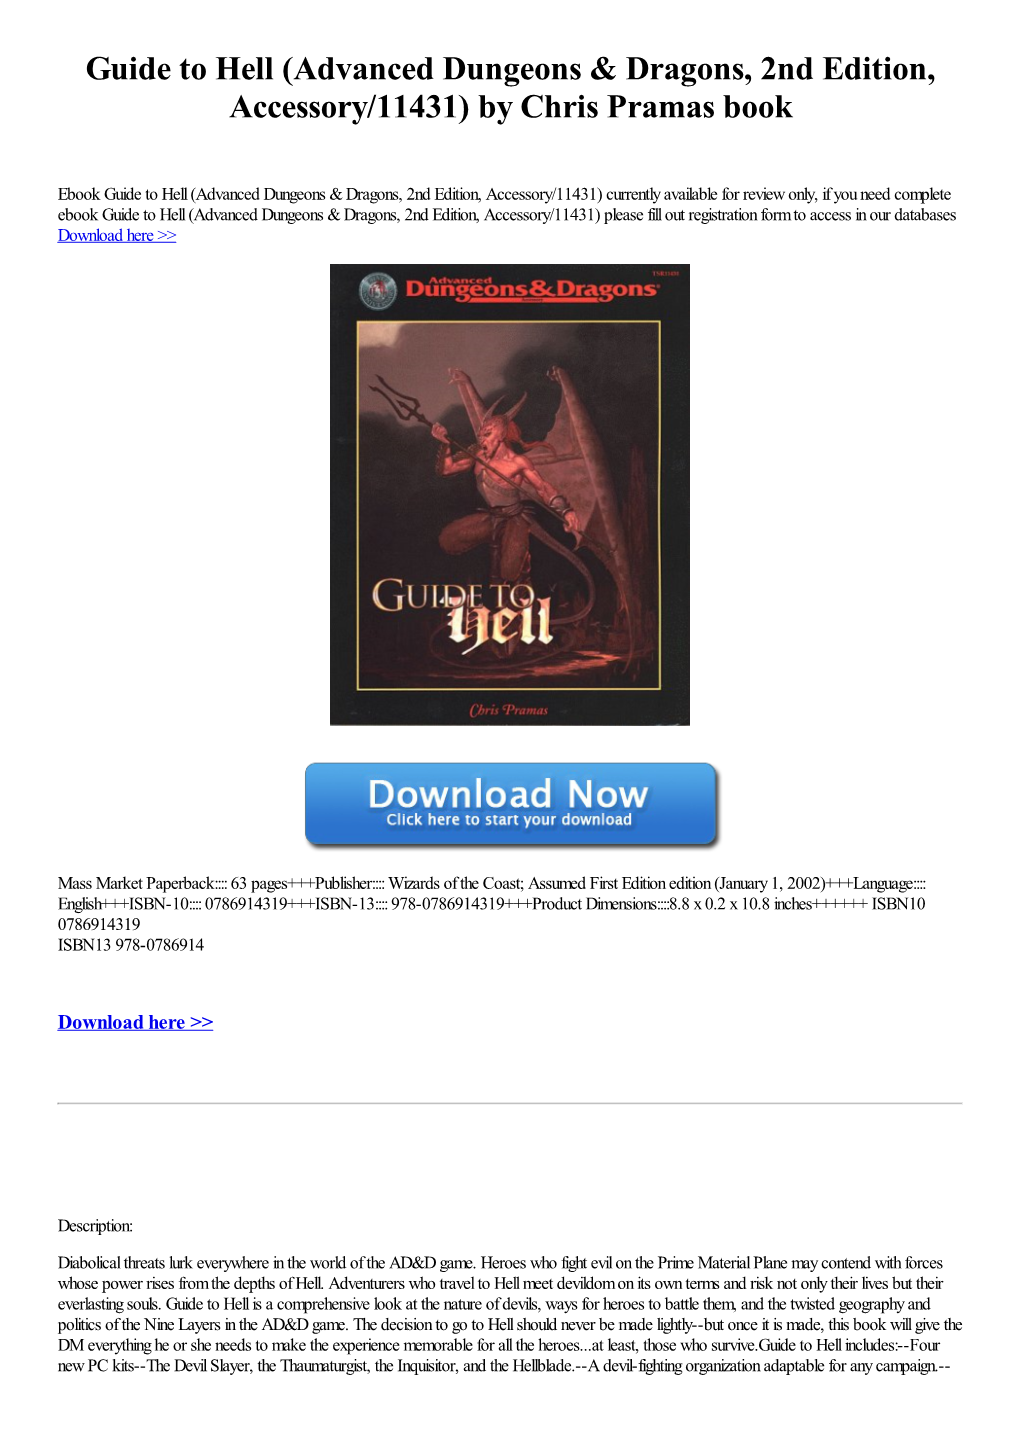 Guide to Hell (Advanced Dungeons & Dragons, 2Nd Edition, Accessory/11431) by Chris Pramas [Book]